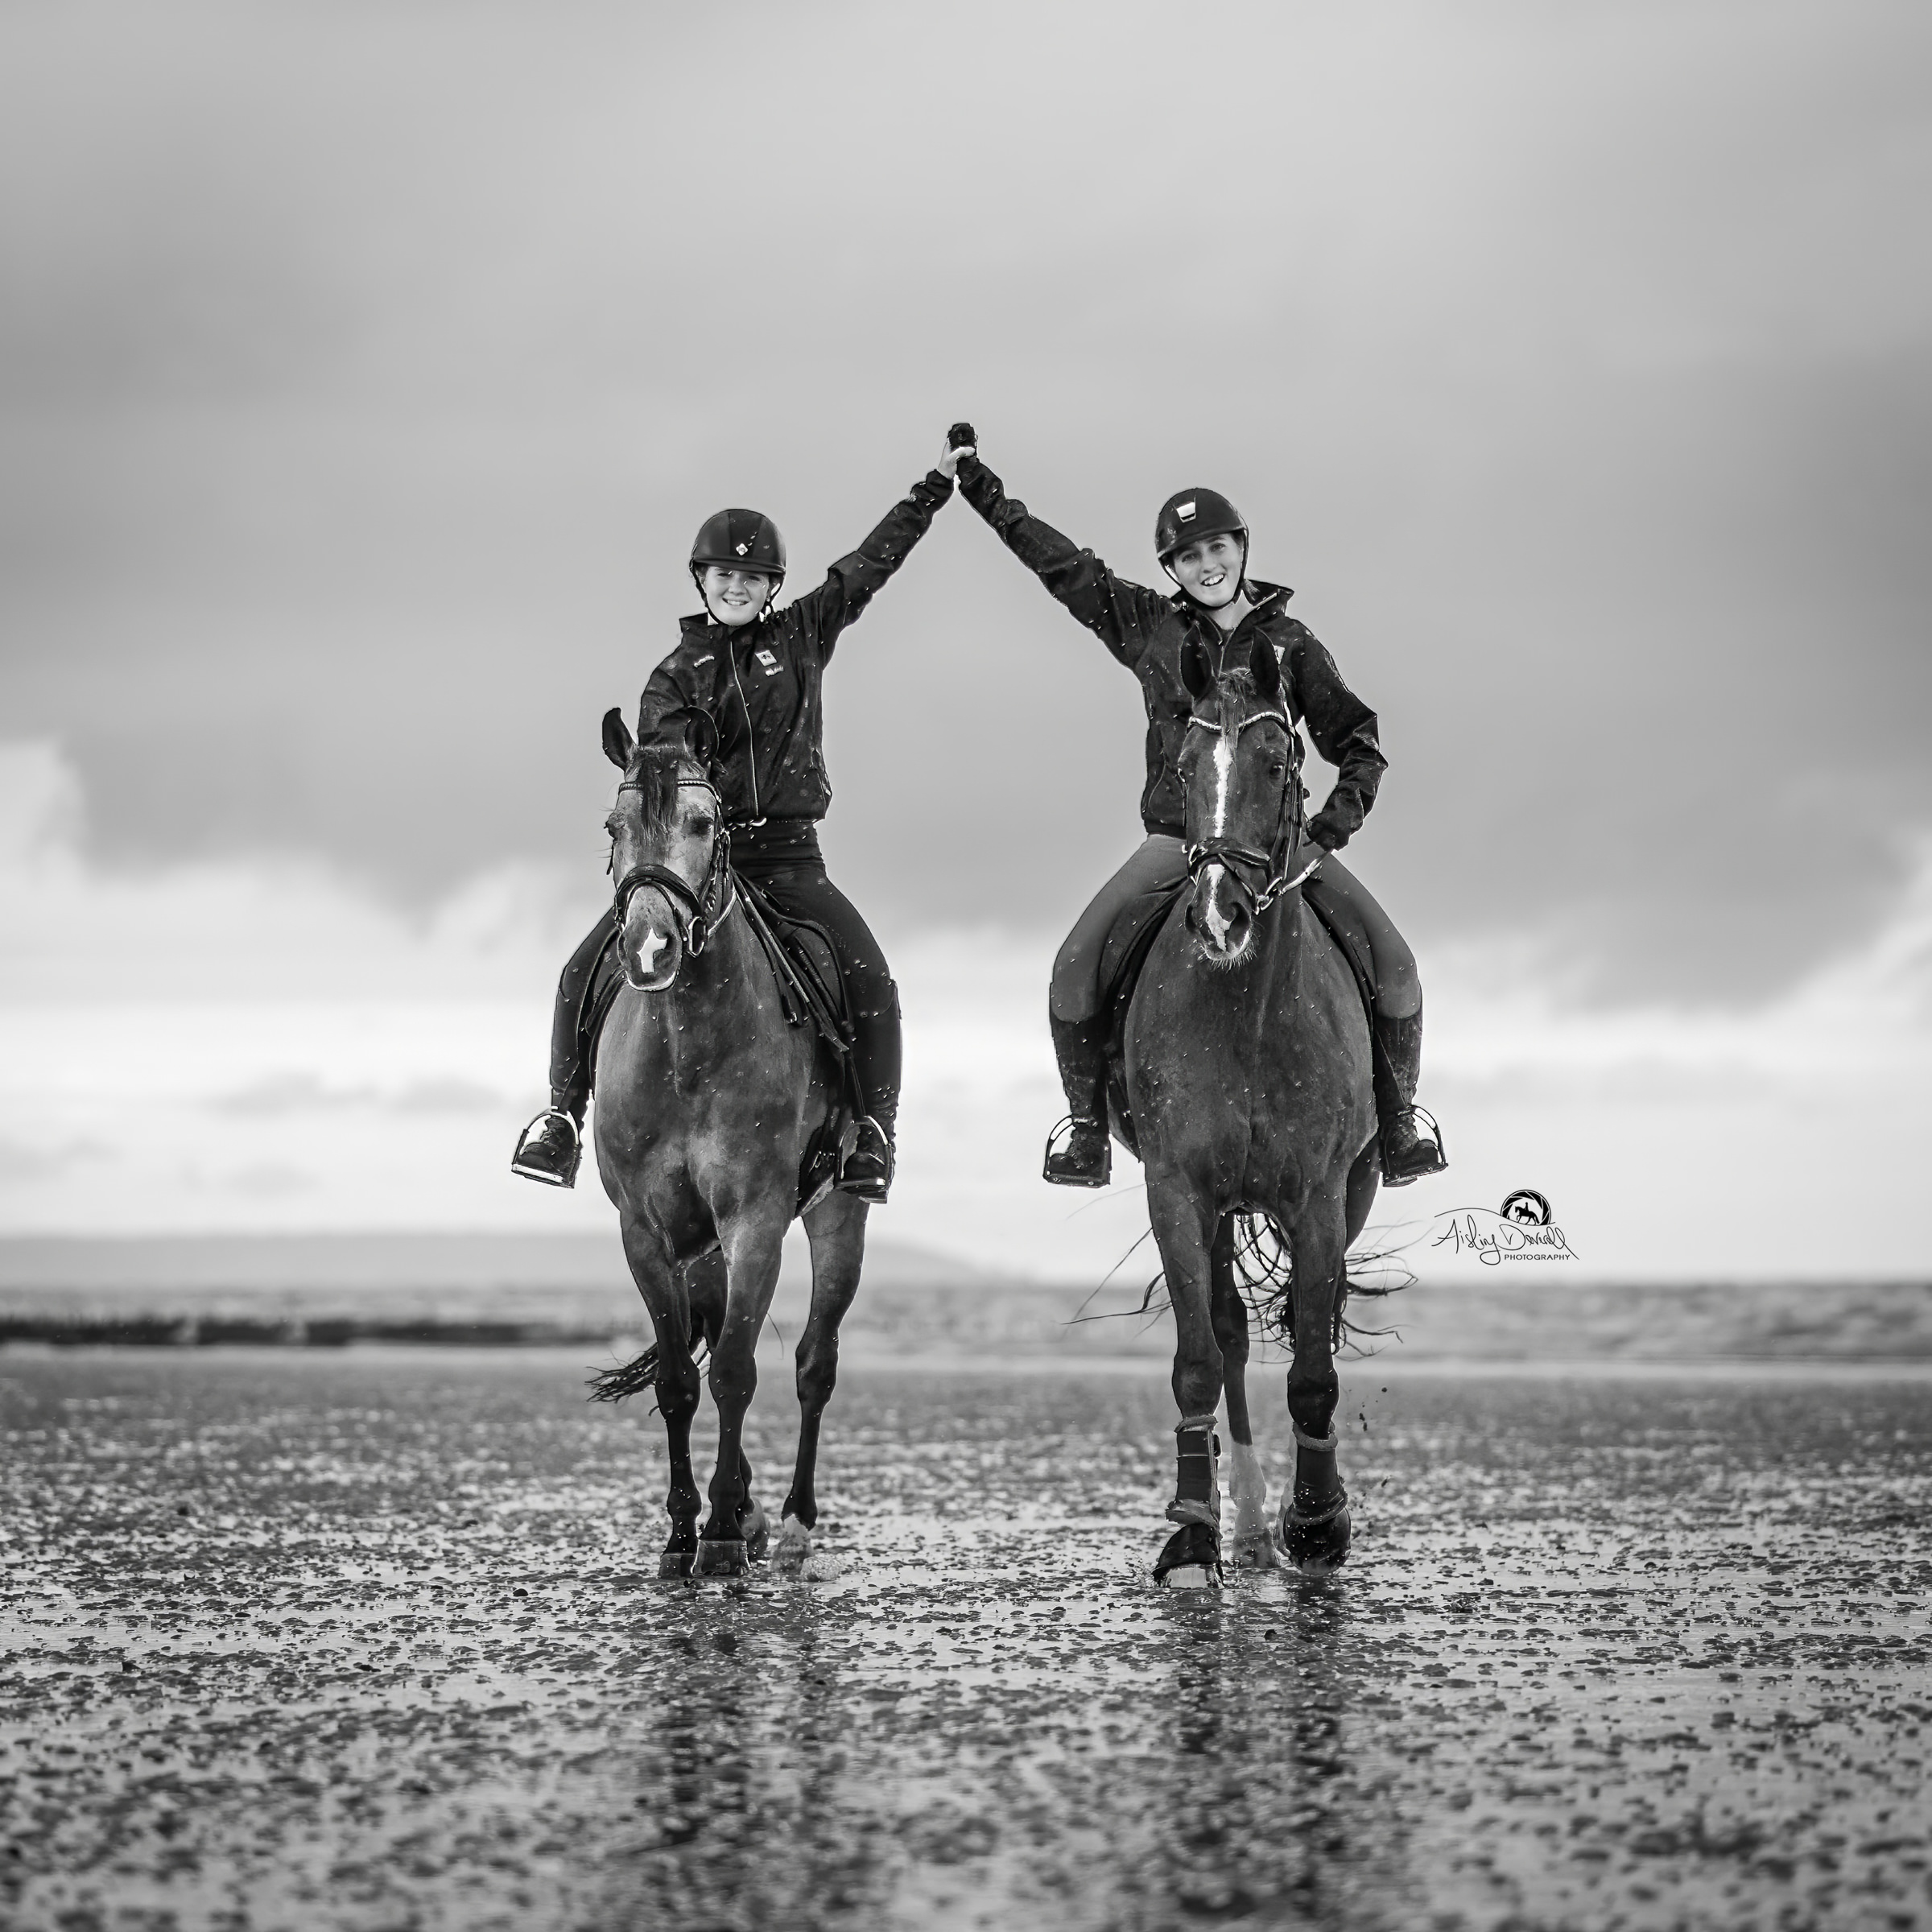 Lifestyle photo of horses on a beach with riders holding hands